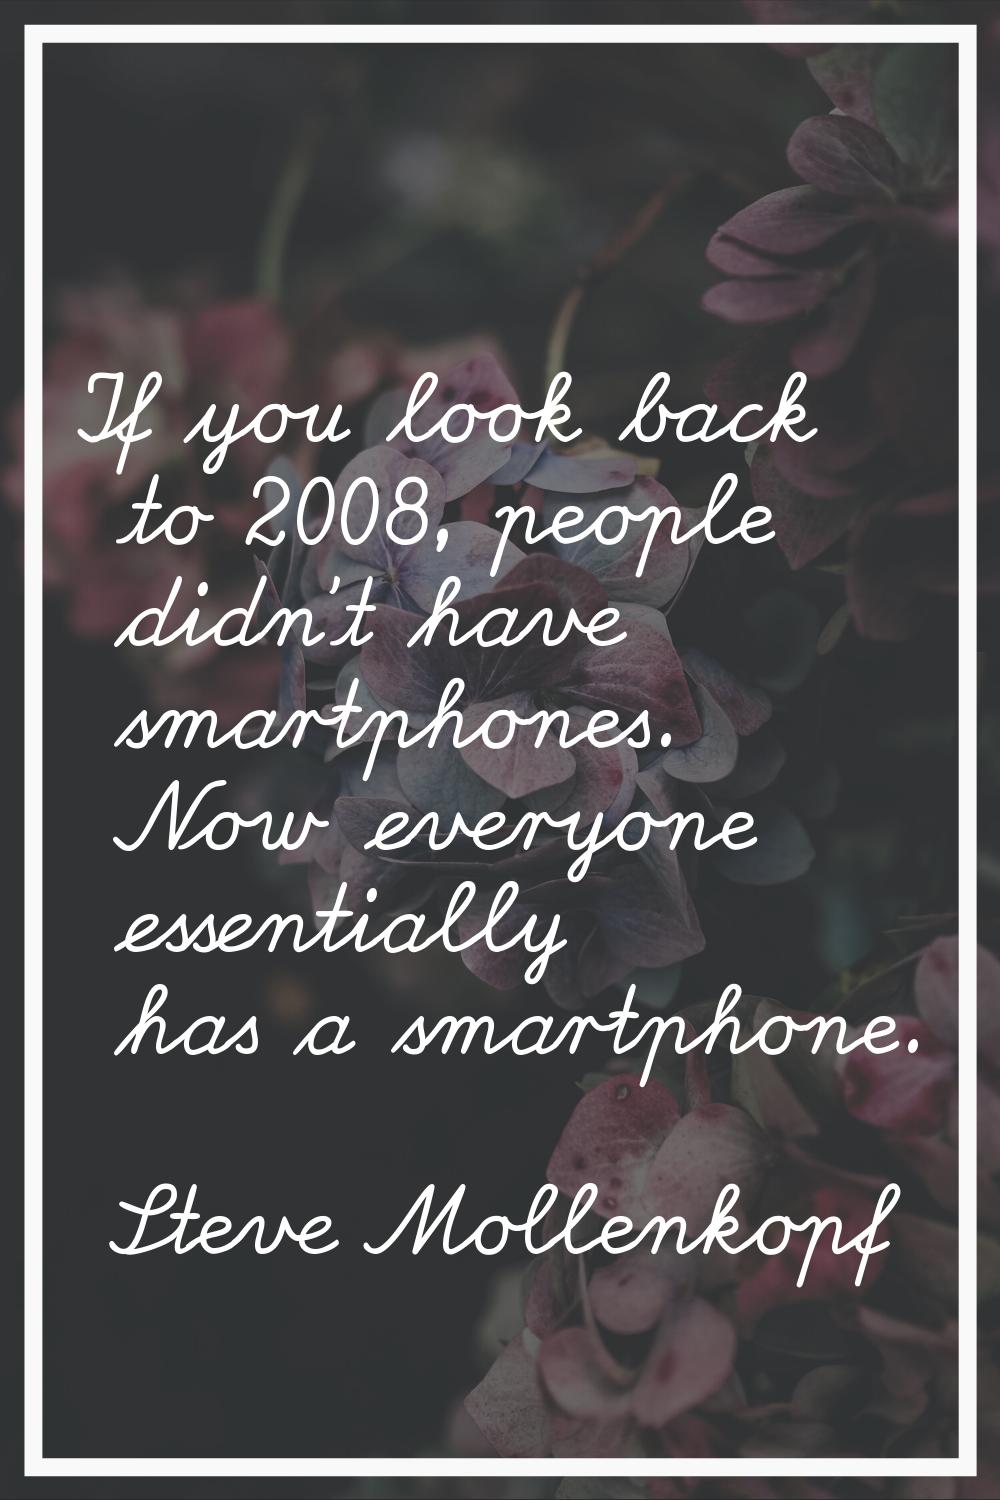 If you look back to 2008, people didn't have smartphones. Now everyone essentially has a smartphone